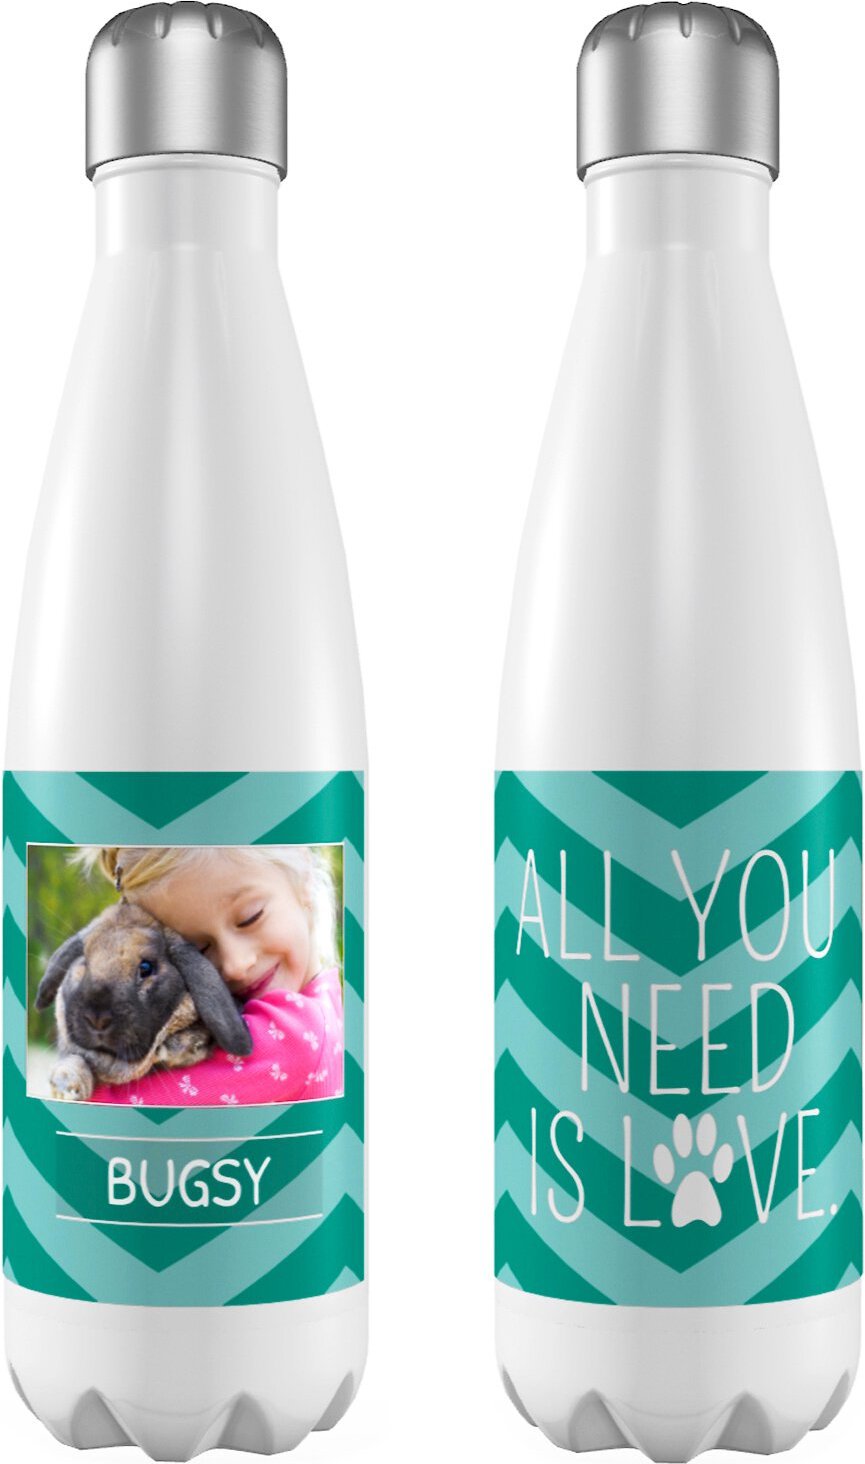 "All You Need Is Love" Slim Personalized Water Bottle